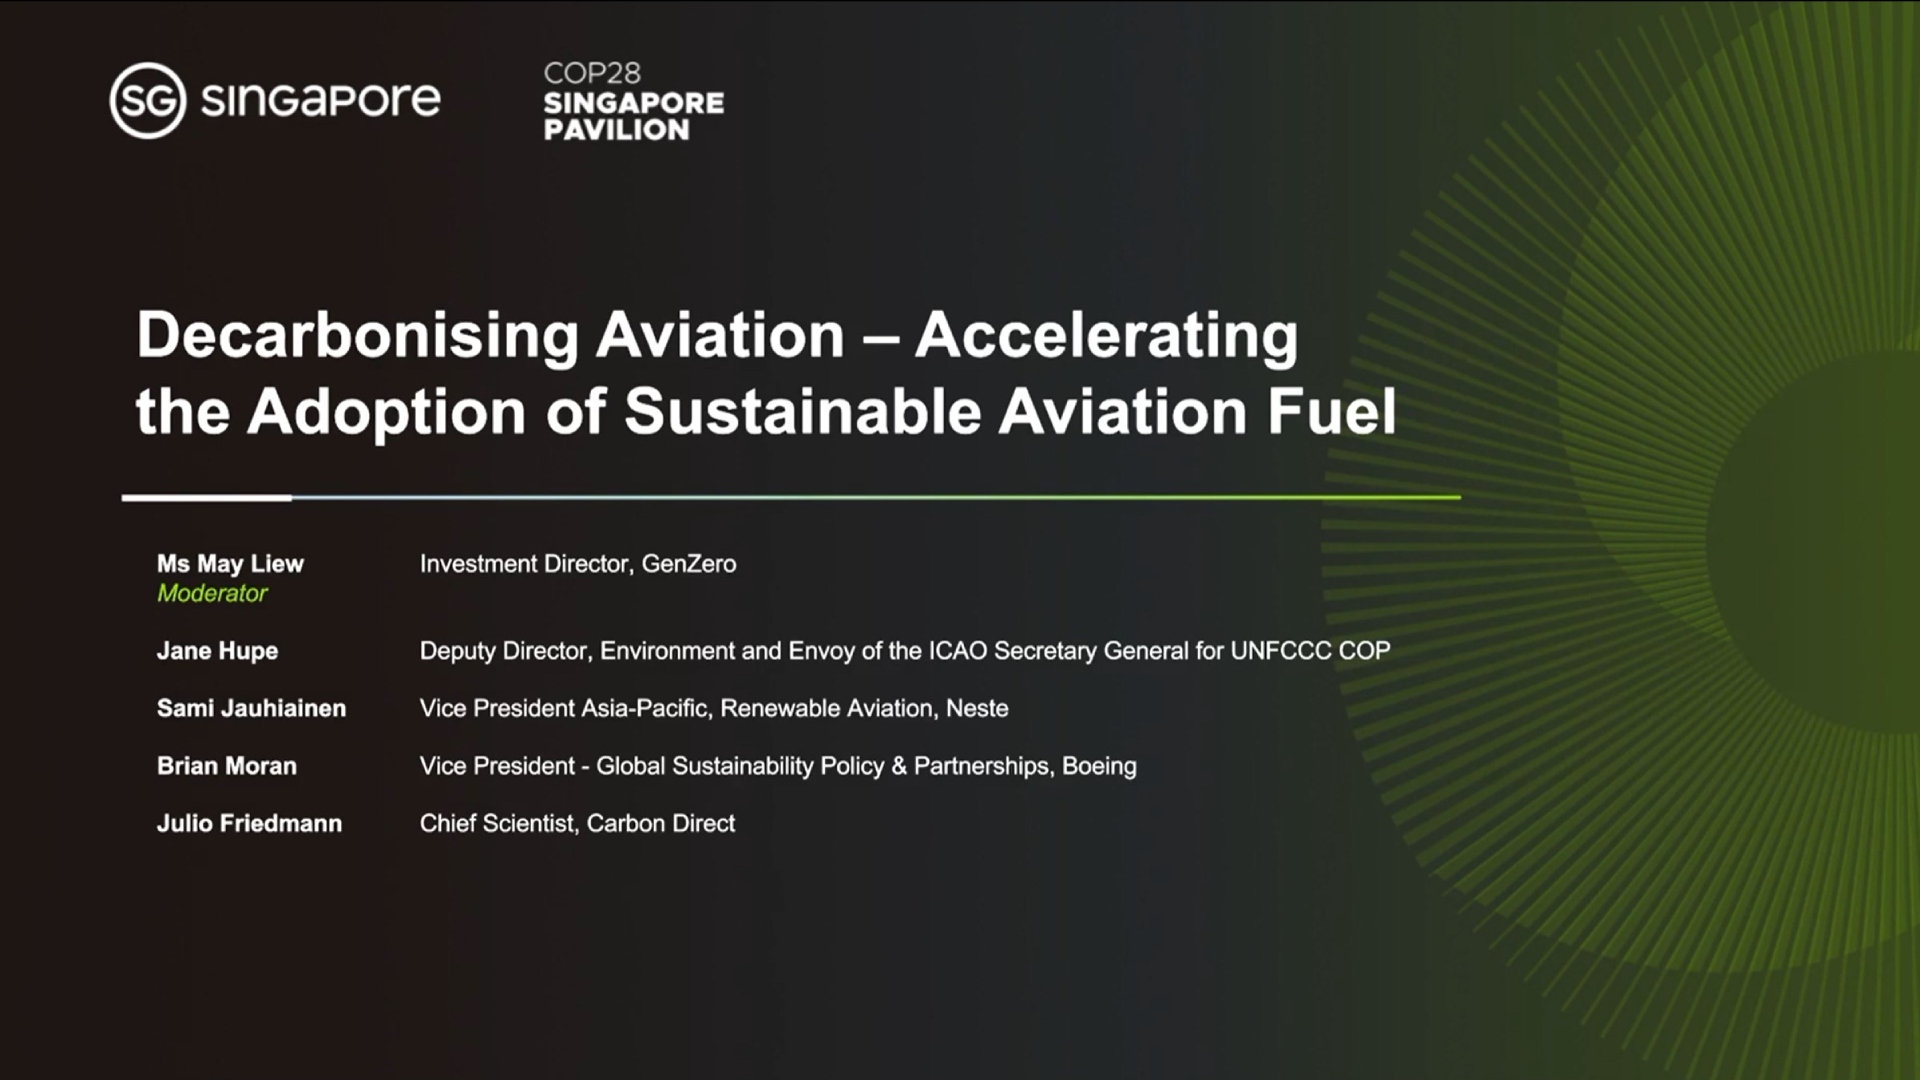 Decarbonising Aviation - Accelerating the Adoption of Sustainable Aviation Fuel